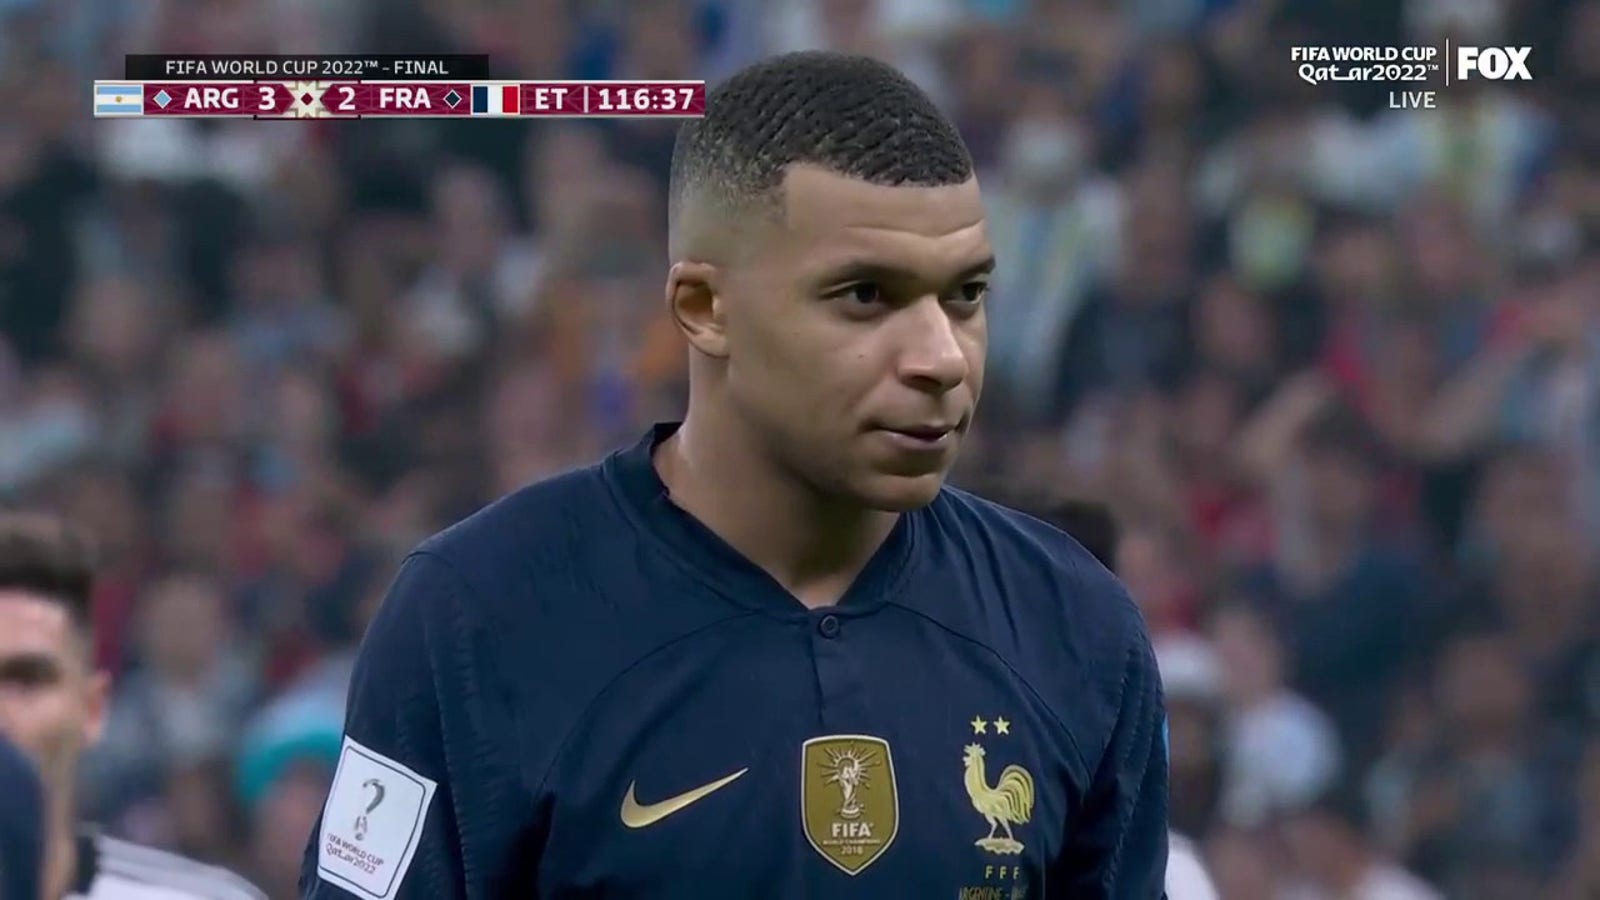 Kylian Mbappe equalized in the 116th minute